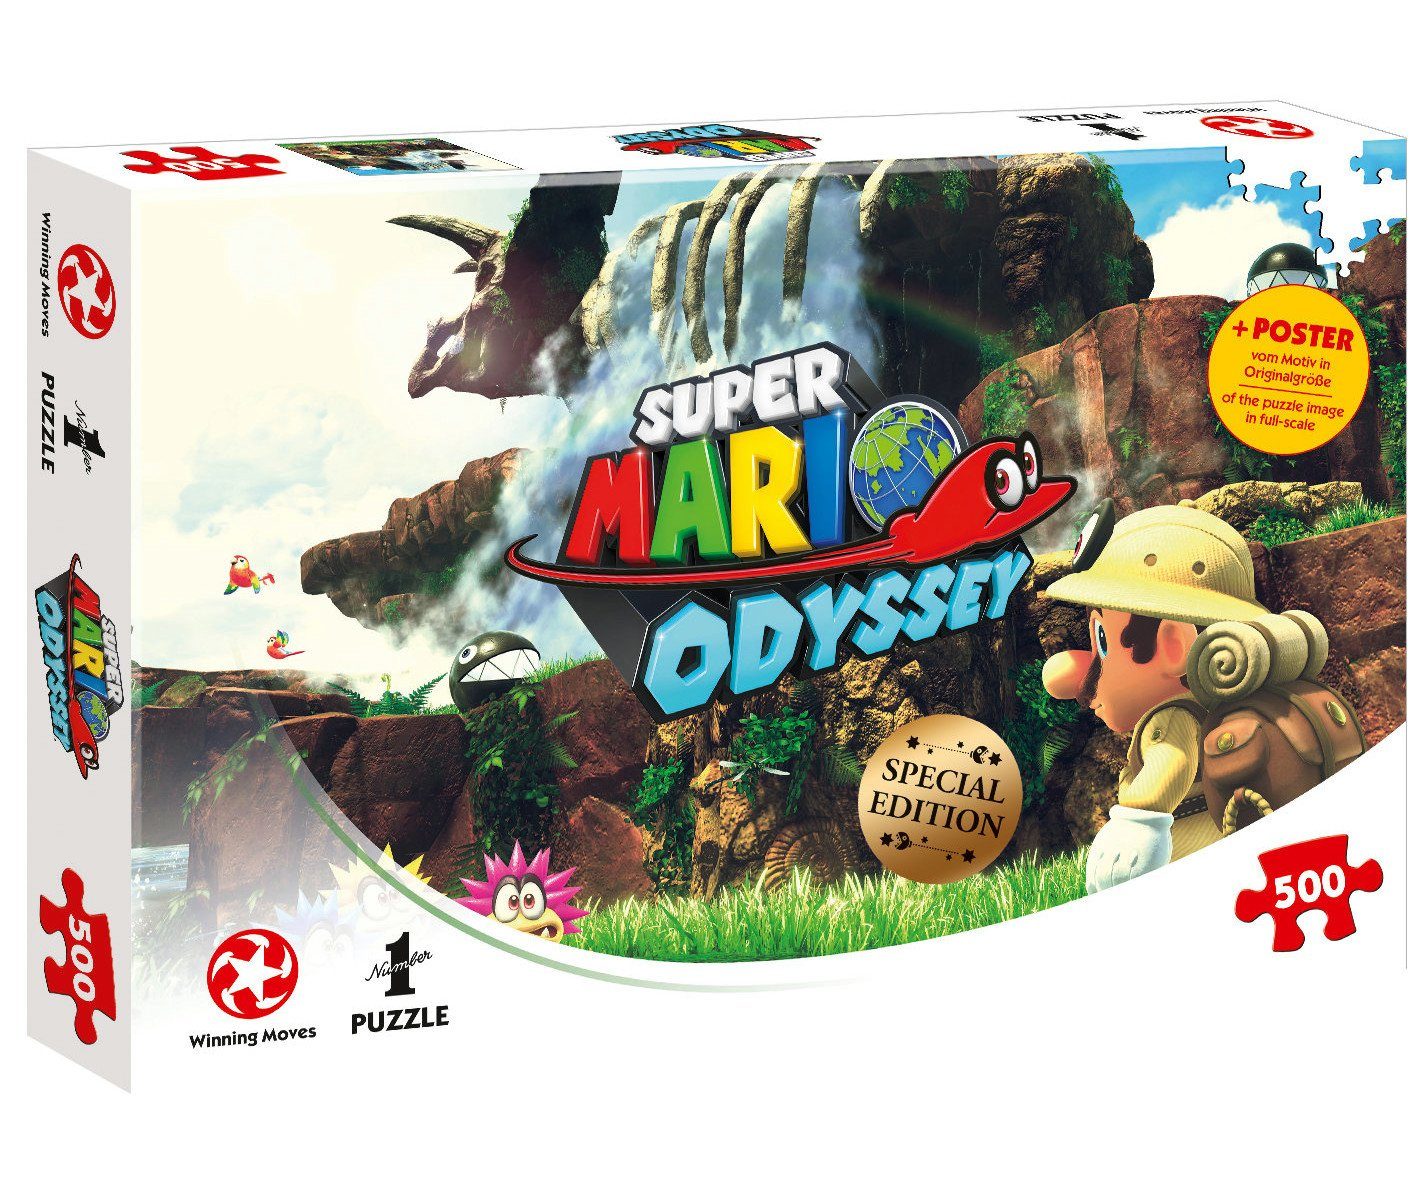 Puzzleteile Odyssey Winning Super Moves Fossil Puzzle 500 Mario Puzzle Falls,